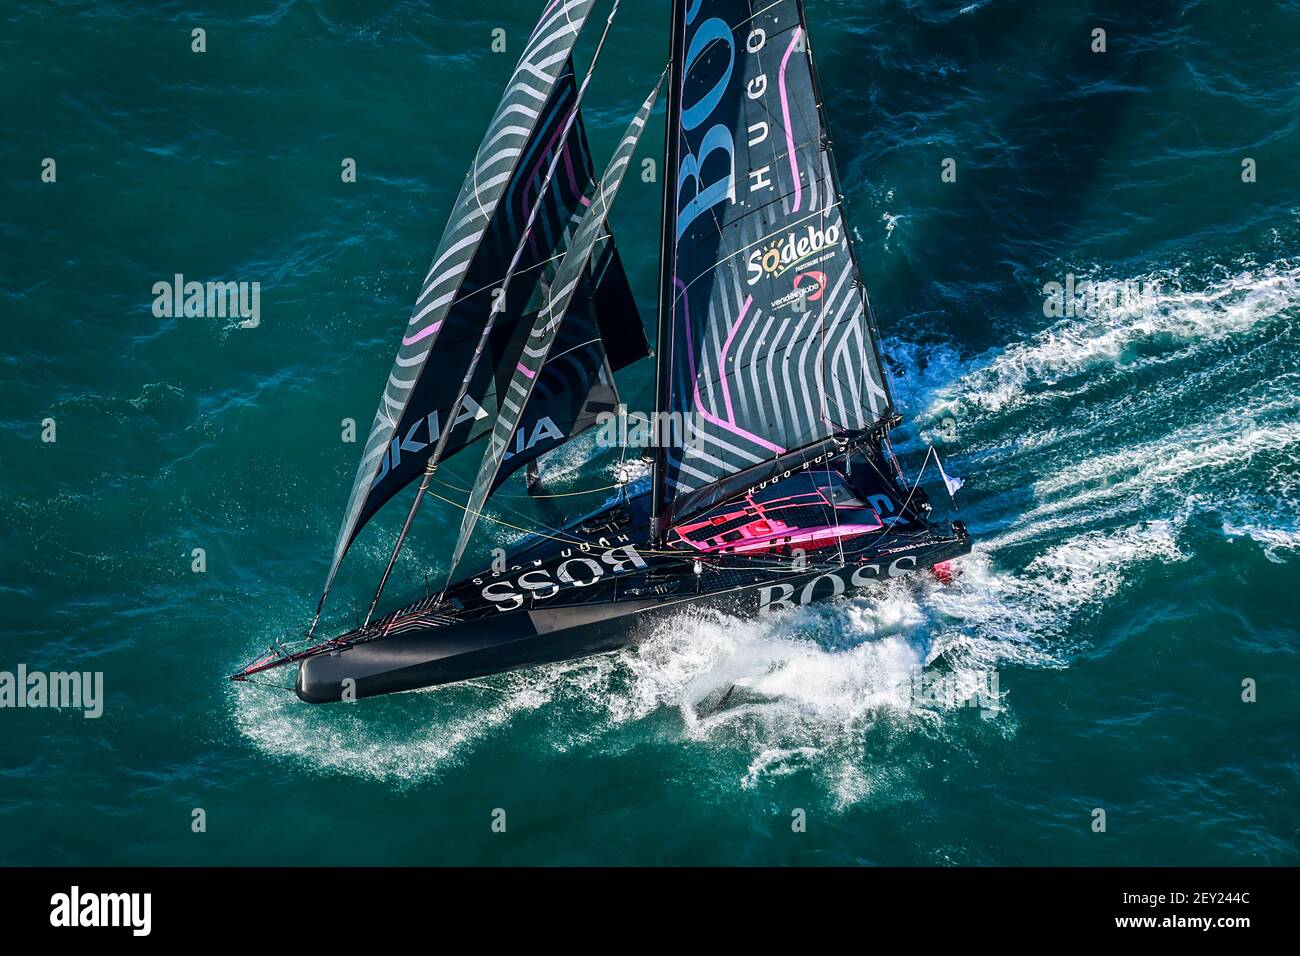 Alex Thomson (gbr) sailing on the Imoca Hugo Boss during the start of the  2020-2021 Vendée Globe, 9th edition of the solo non-stop round the world  yacht race, on November 9, 2020